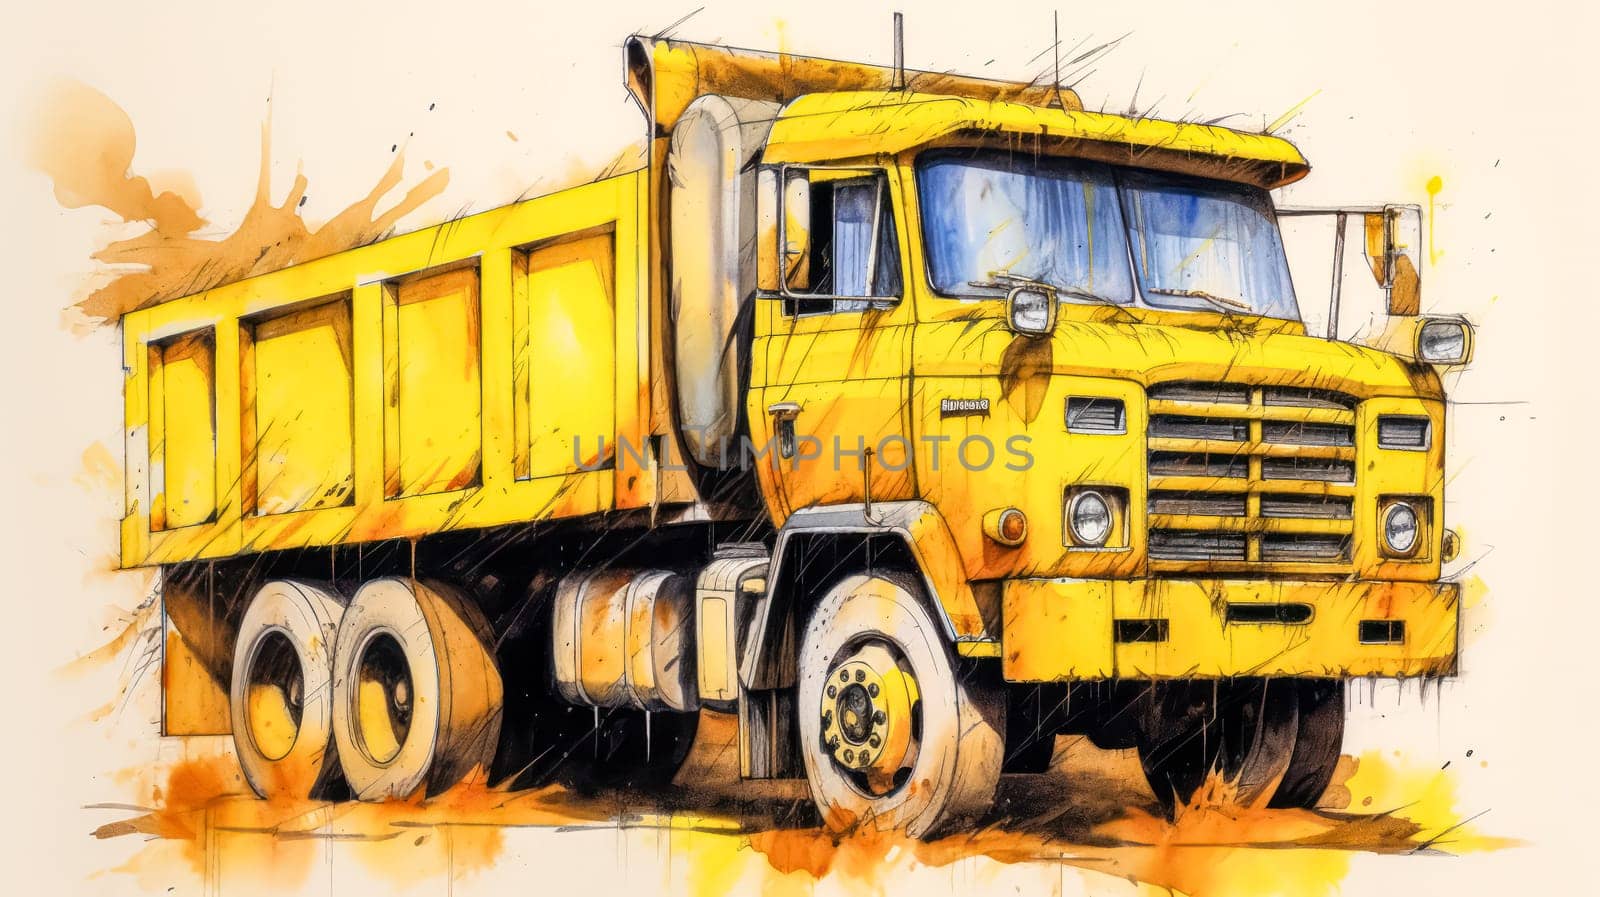 A vibrant watercolor sketch of a truck with yellow gray lines, portraying rugged durability and industrial strength in artistic detail.